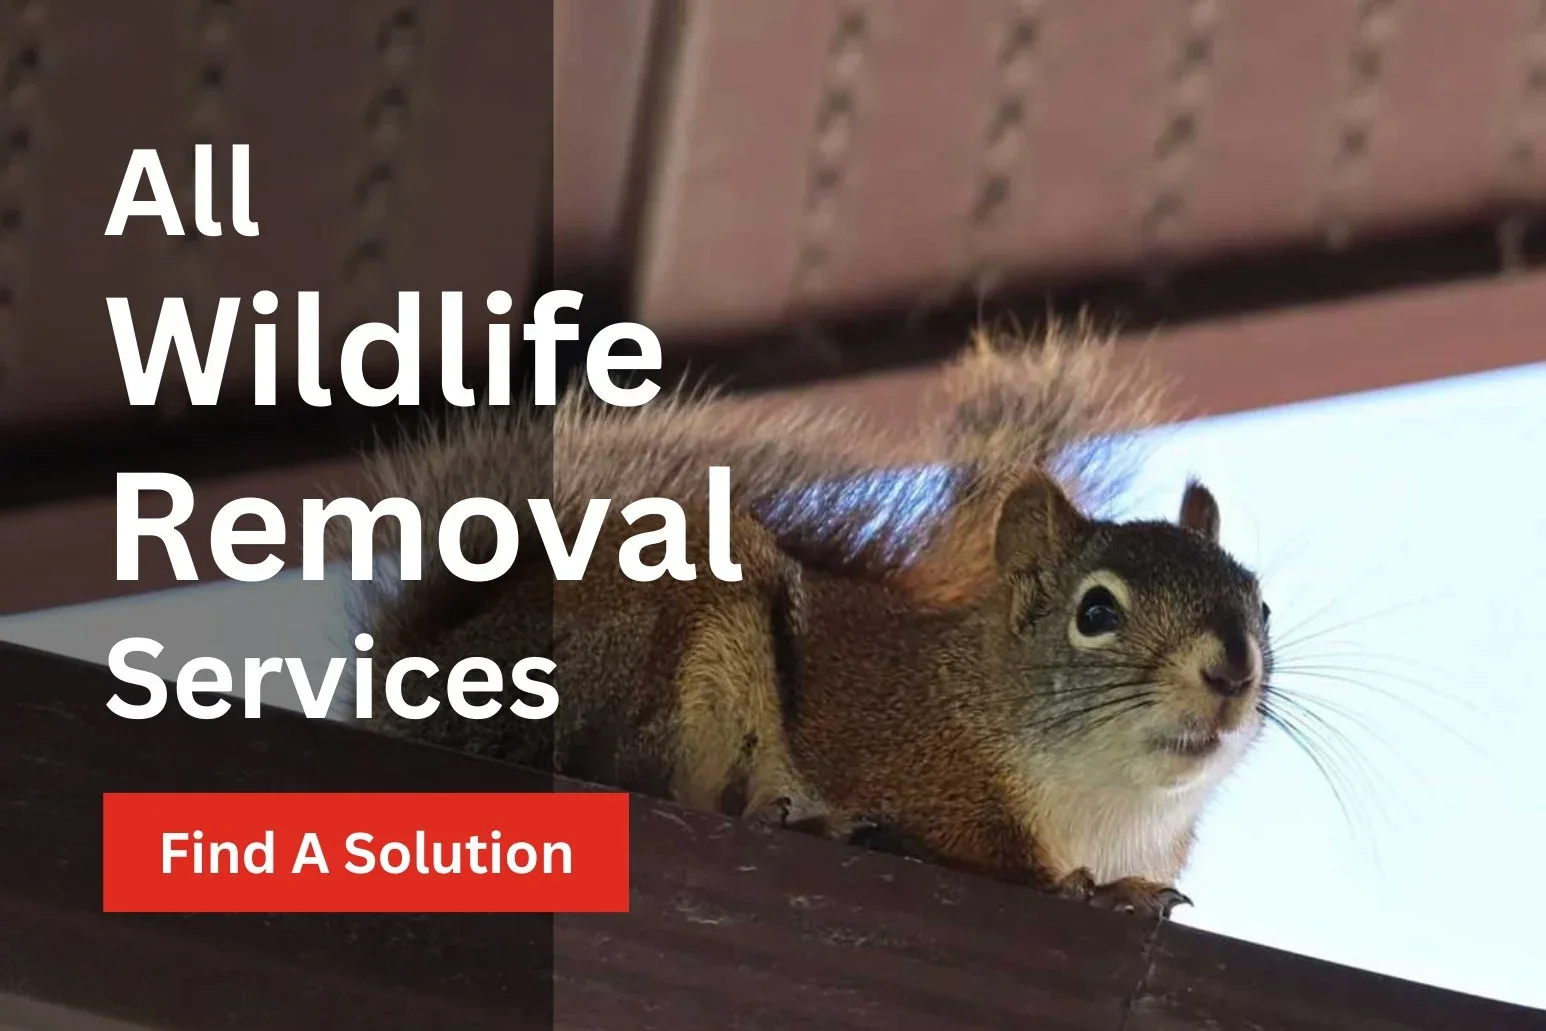 All Wildlife Removal Services